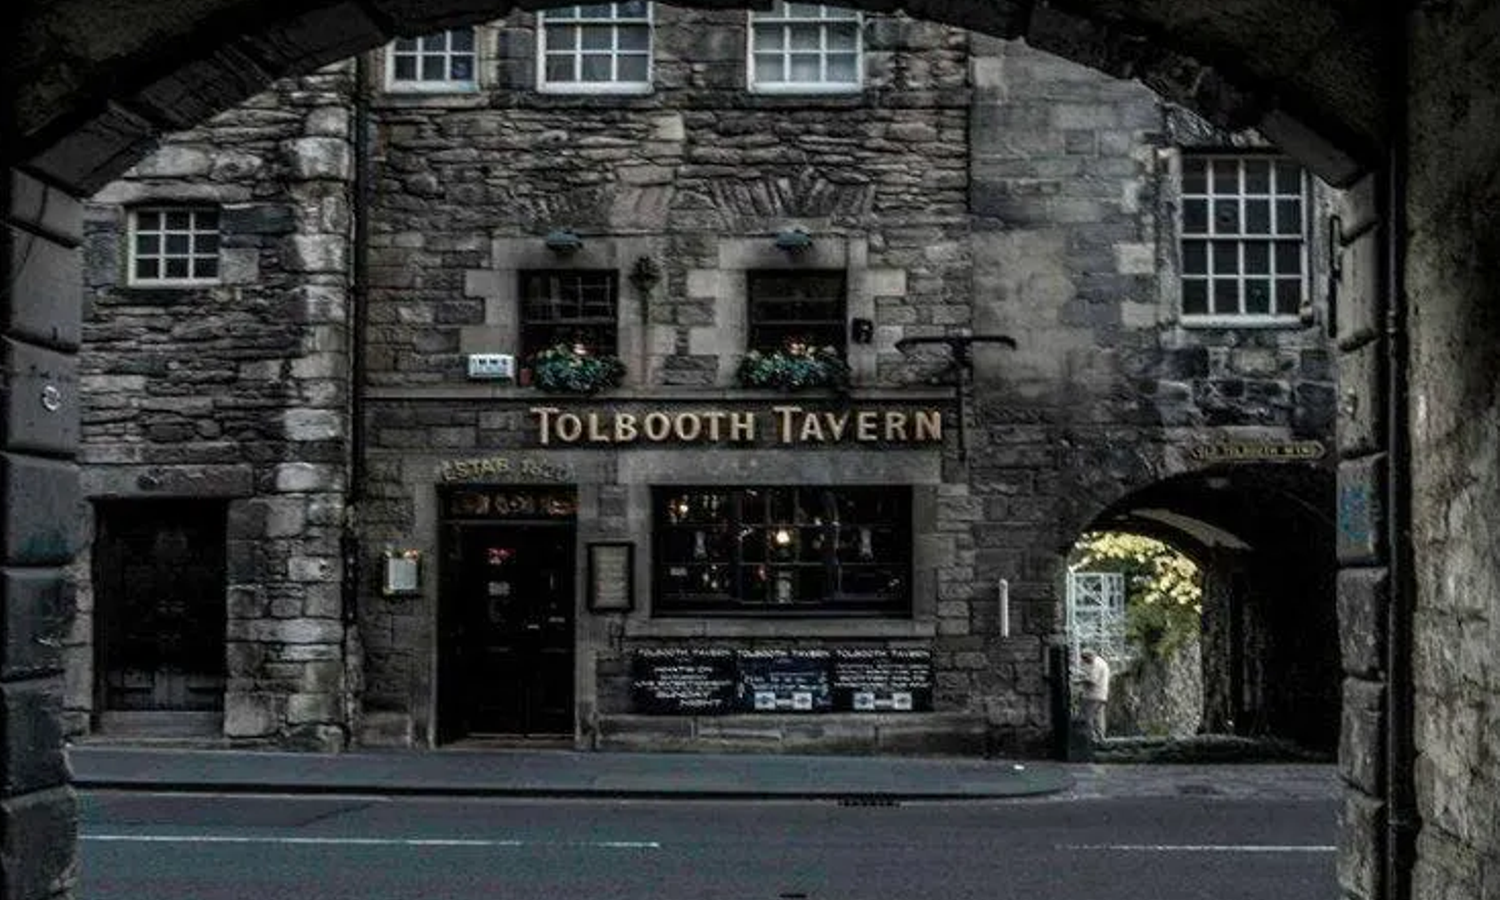 Image of Tolbooth Tavern. A quaint tavern with grey bricks in an old street.